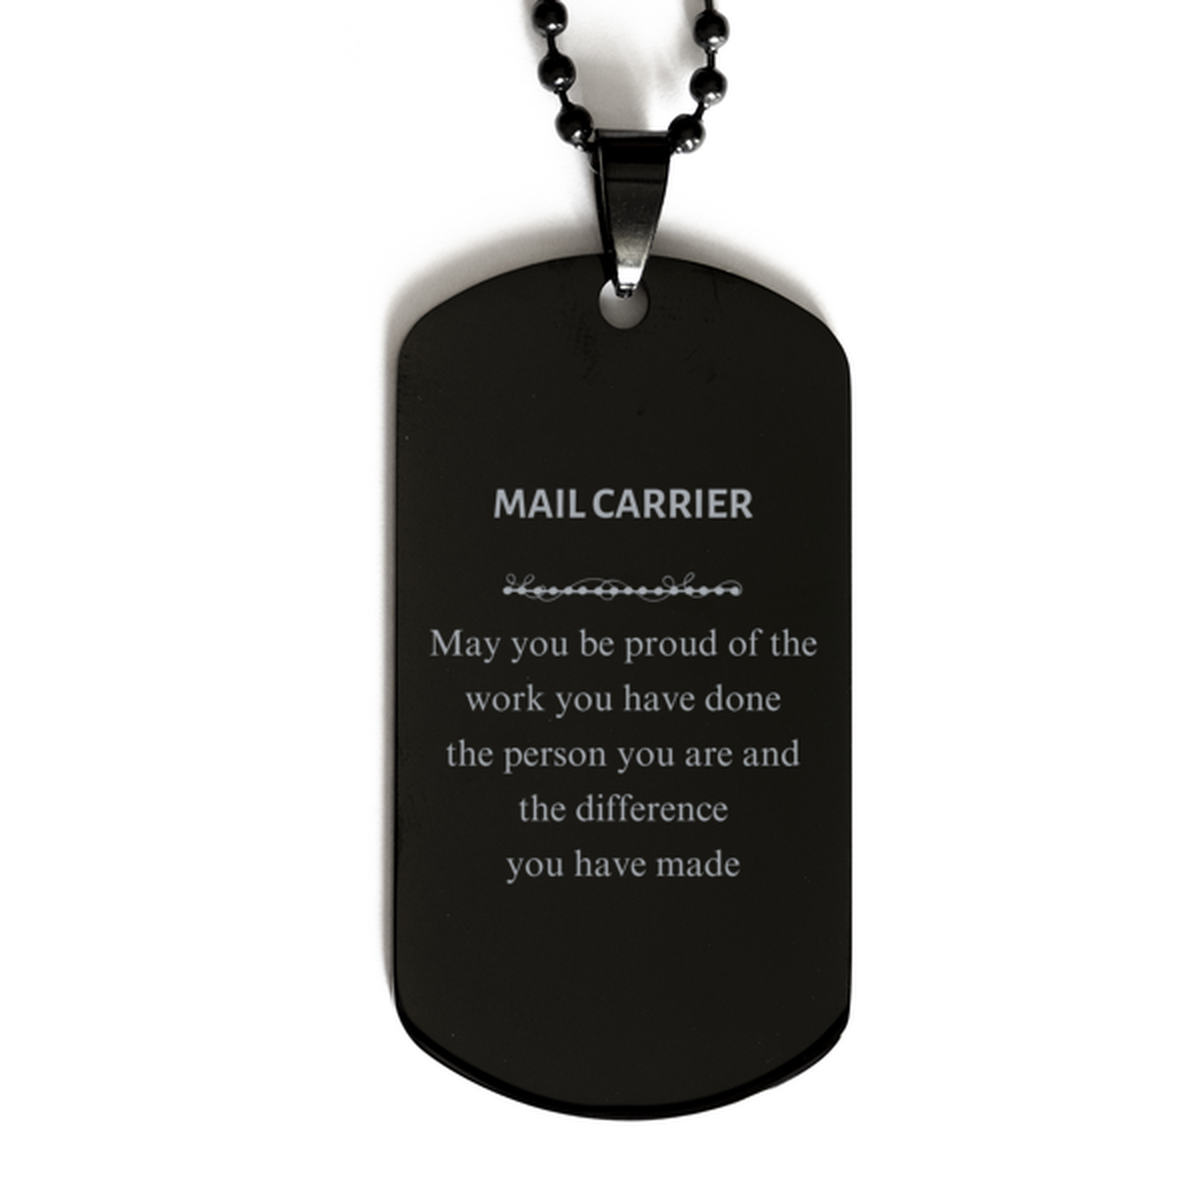 Mail Carrier May you be proud of the work you have done, Retirement Mail Carrier Black Dog Tag for Colleague Appreciation Gifts Amazing for Mail Carrier